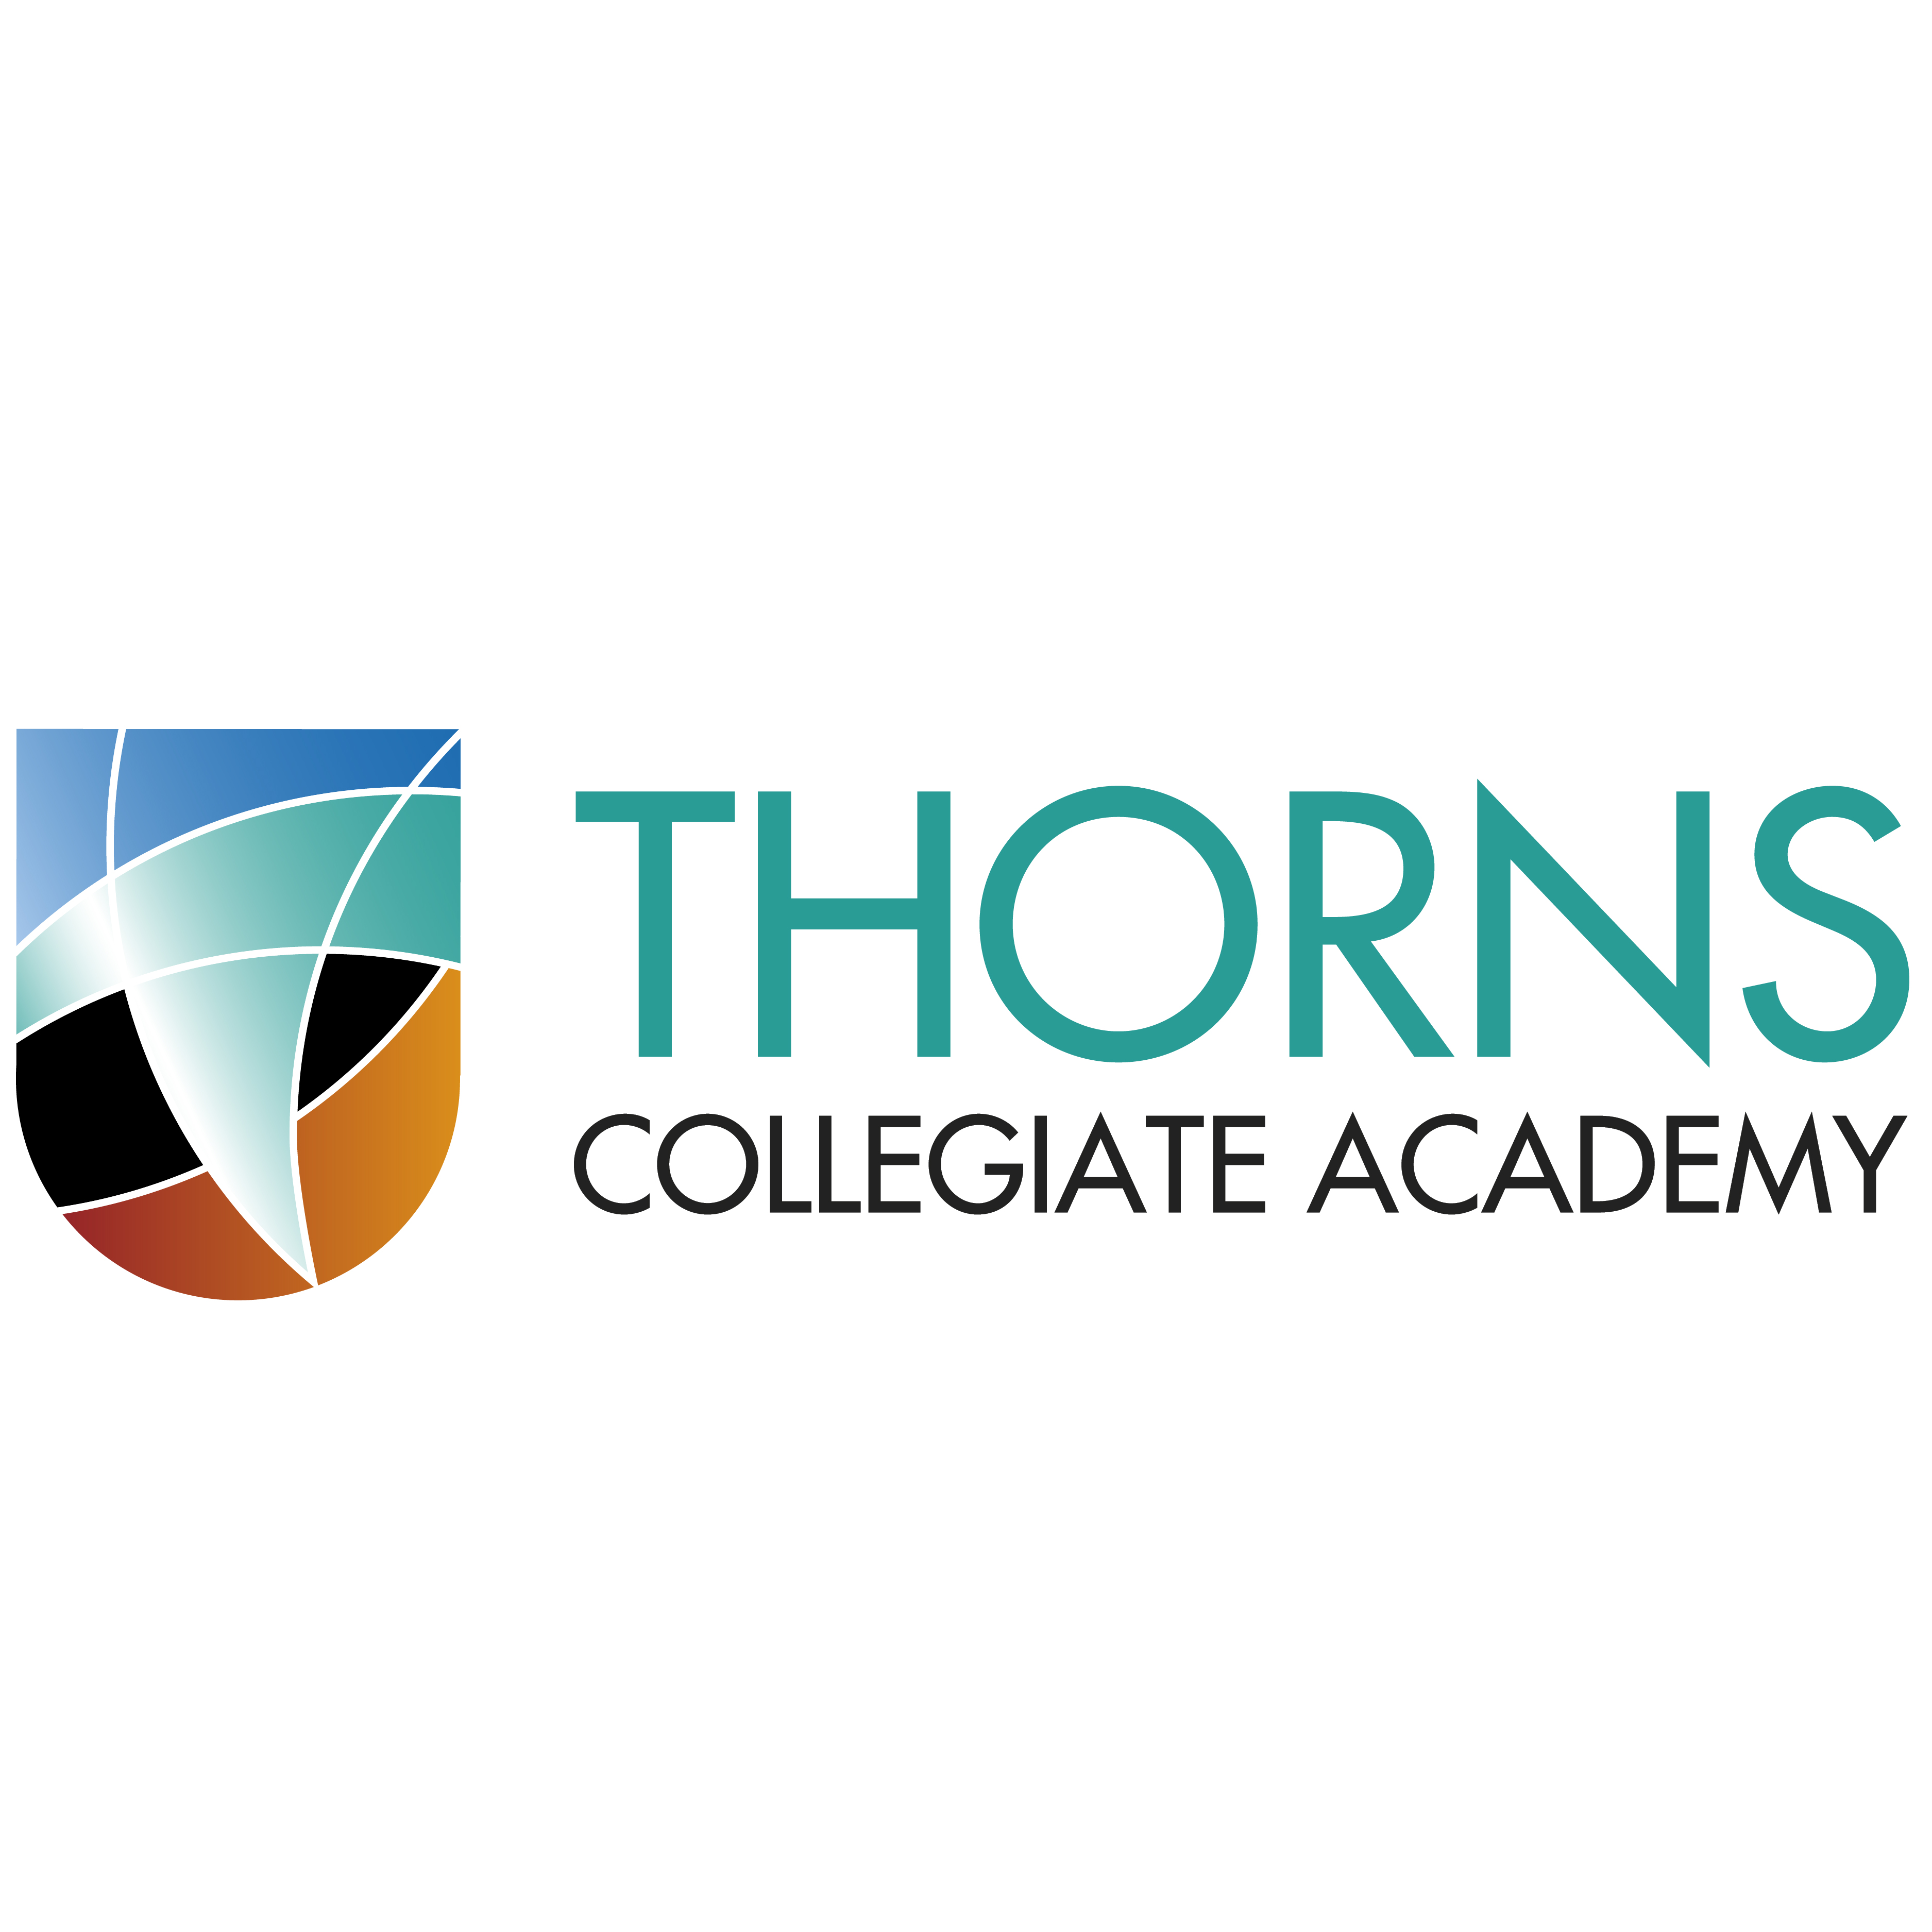 Thorns Academy-08 logo design by logo designer Happy Giraffe for your inspiration and for the worlds largest logo competition